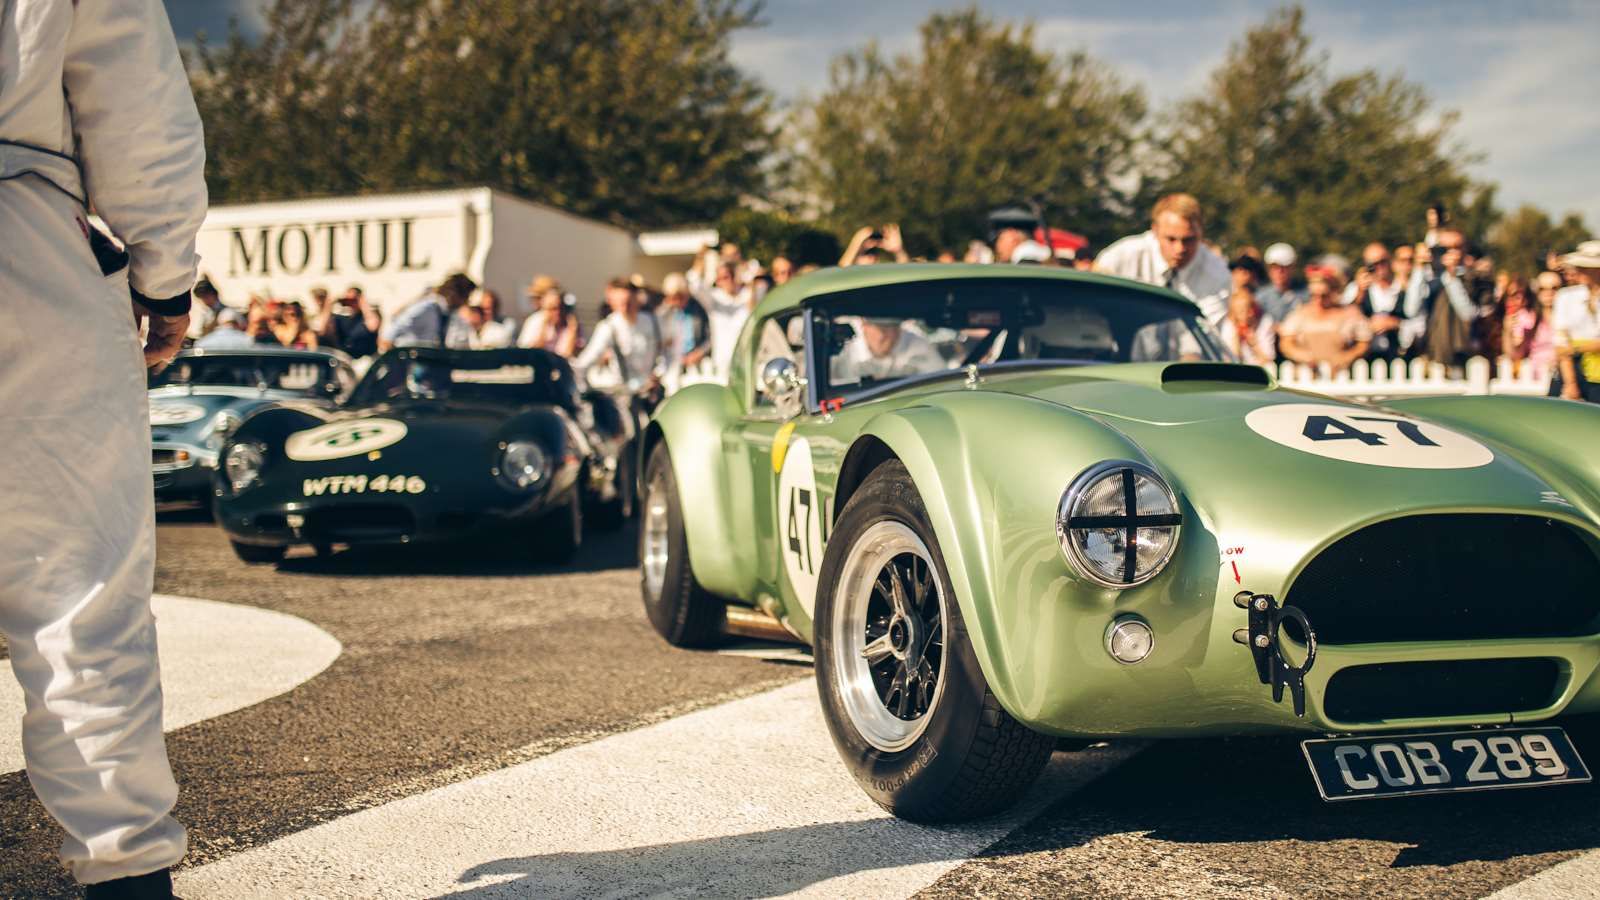 Goodwood Revival is the premier vintage event in Europe